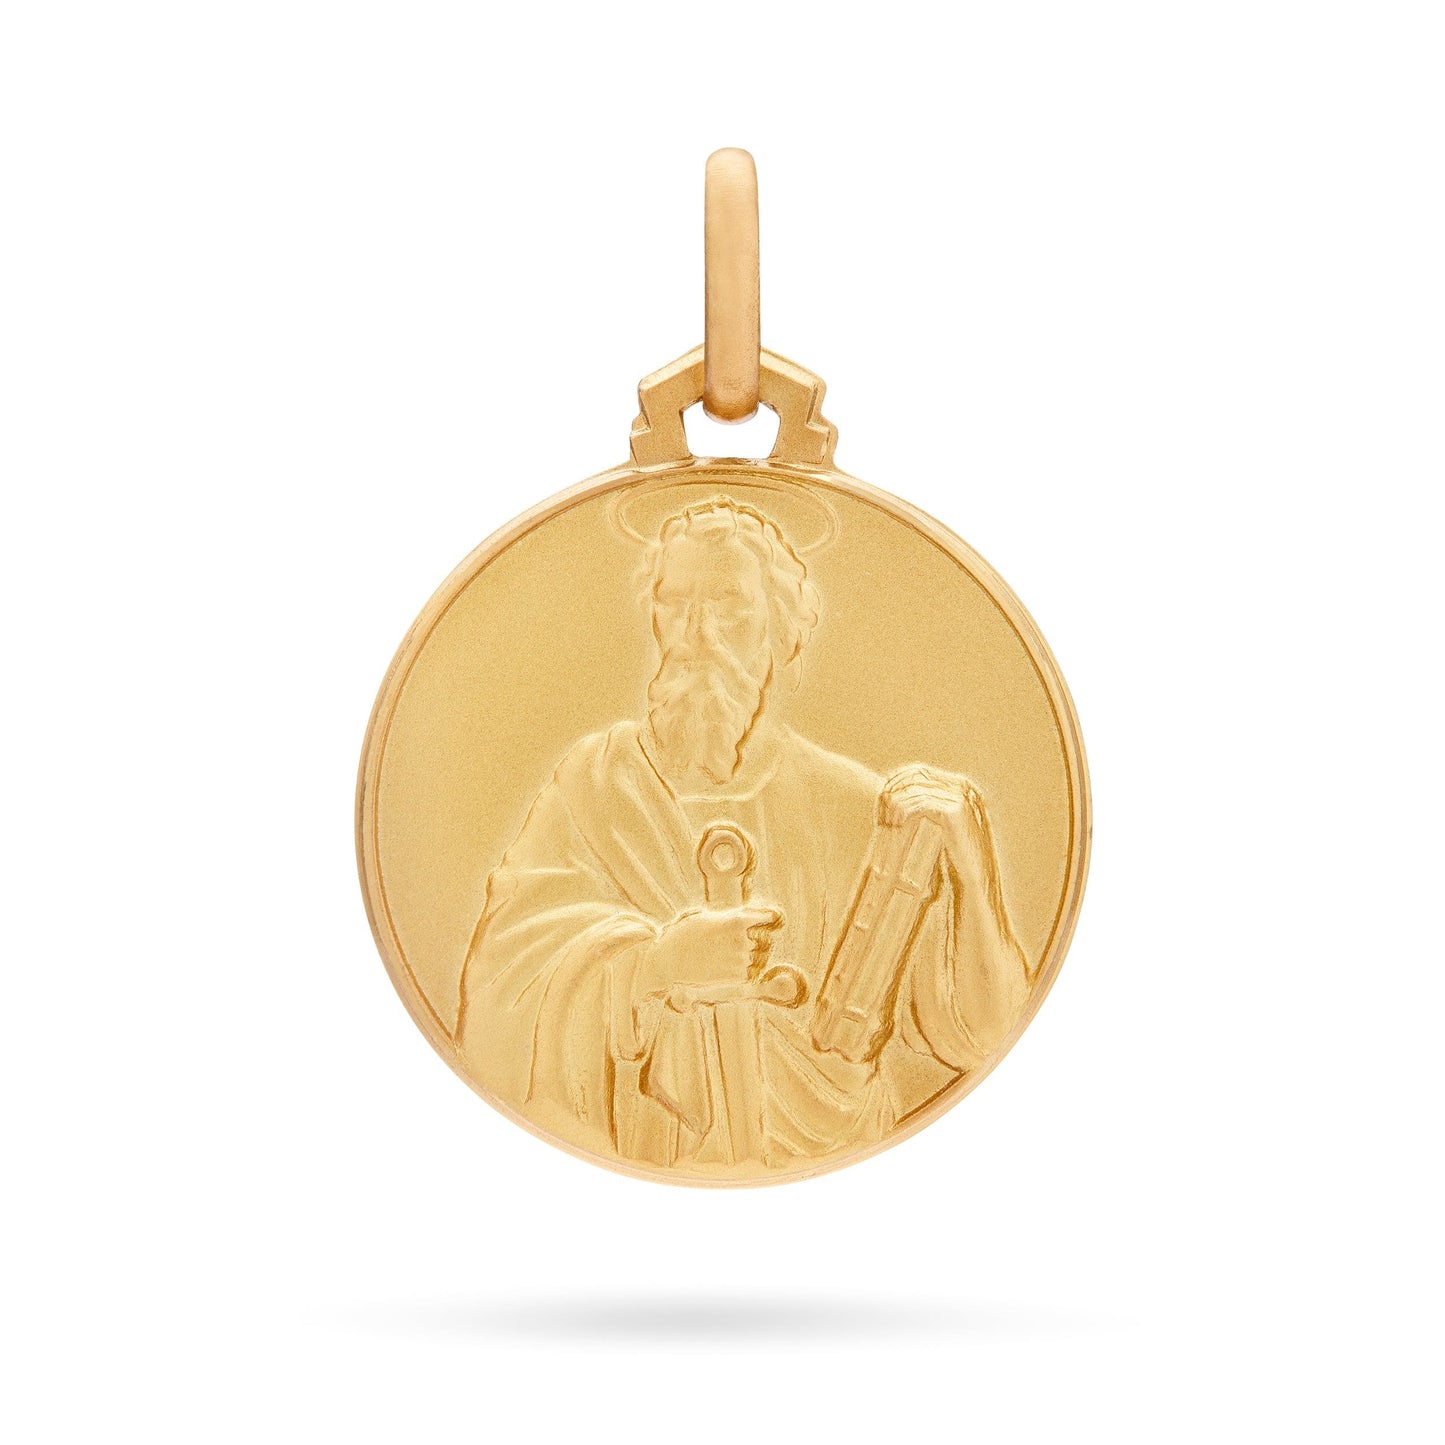 MONDO CATTOLICO Jewelry 14 mm (0.55 in) Gold medal of Saint Paul